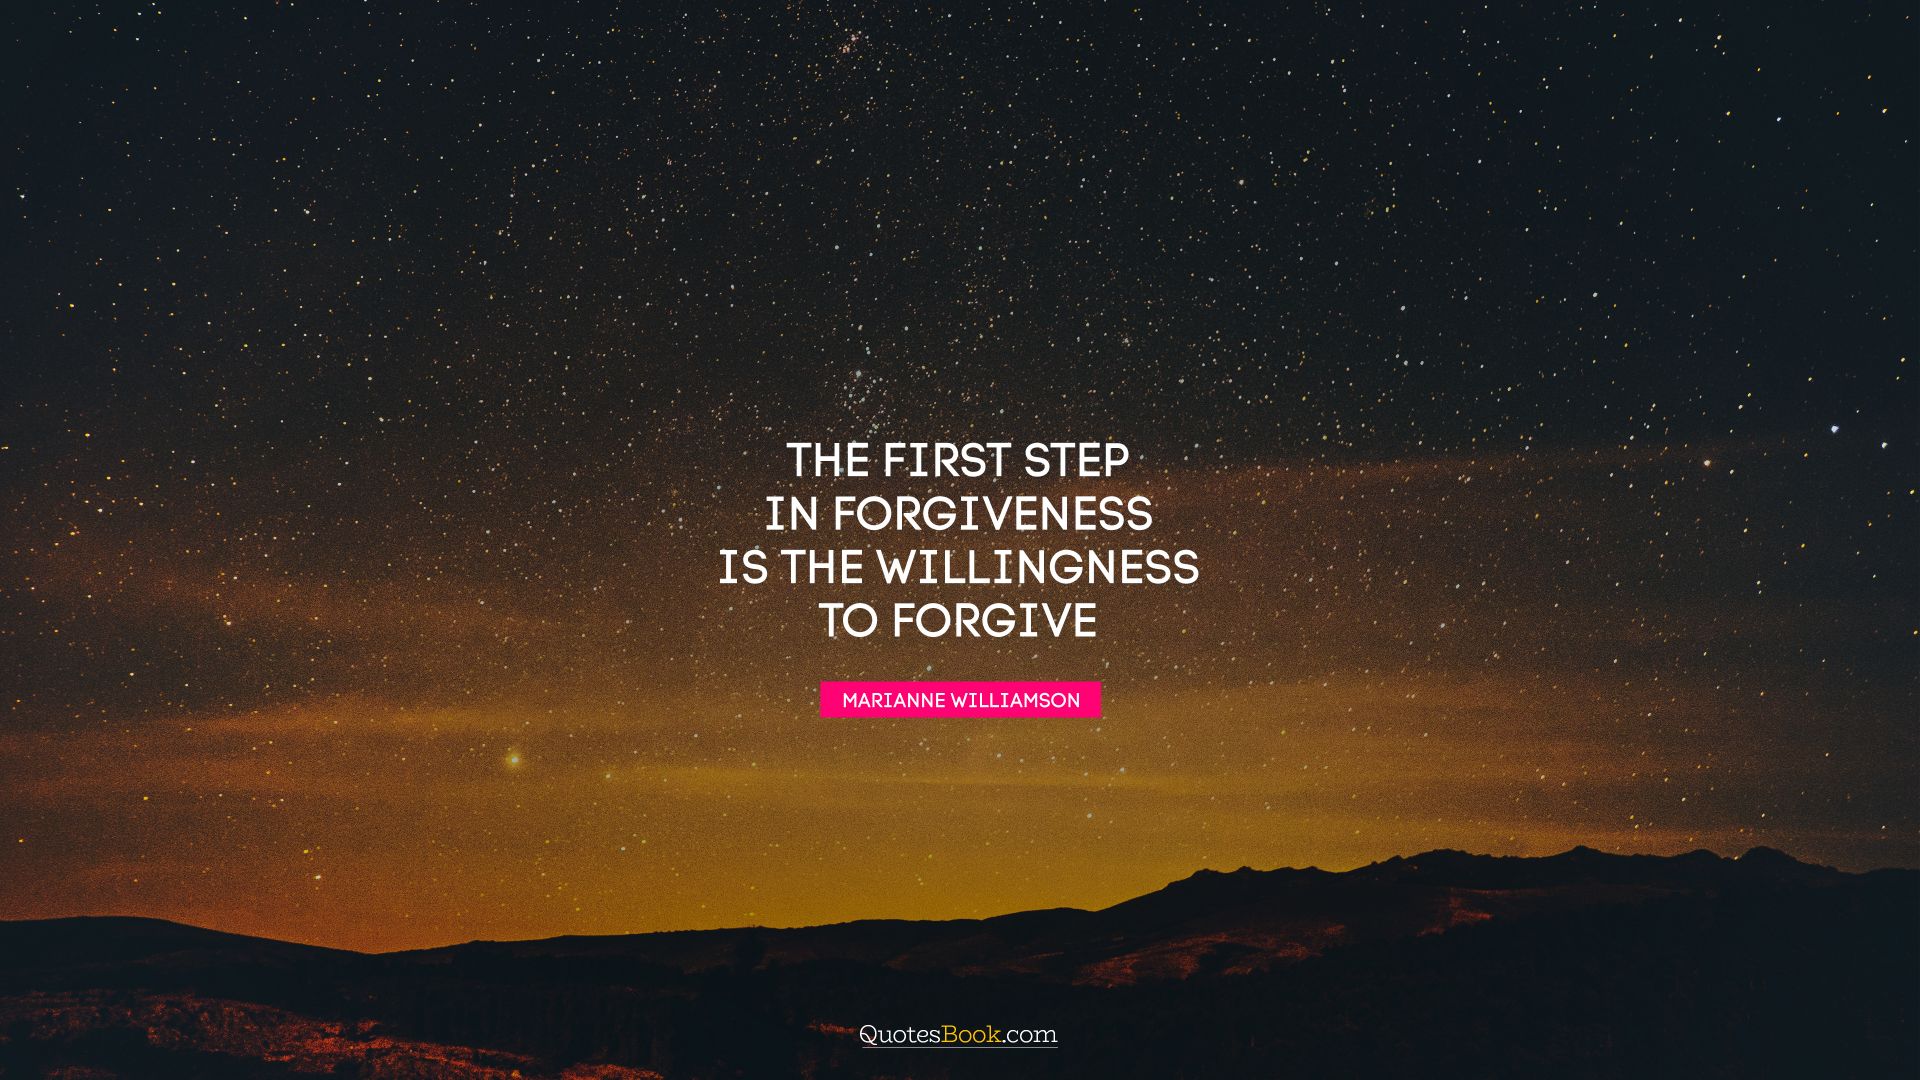 The first step in forgiveness is the willingness to forgive. - Quote by Marianne Williamson